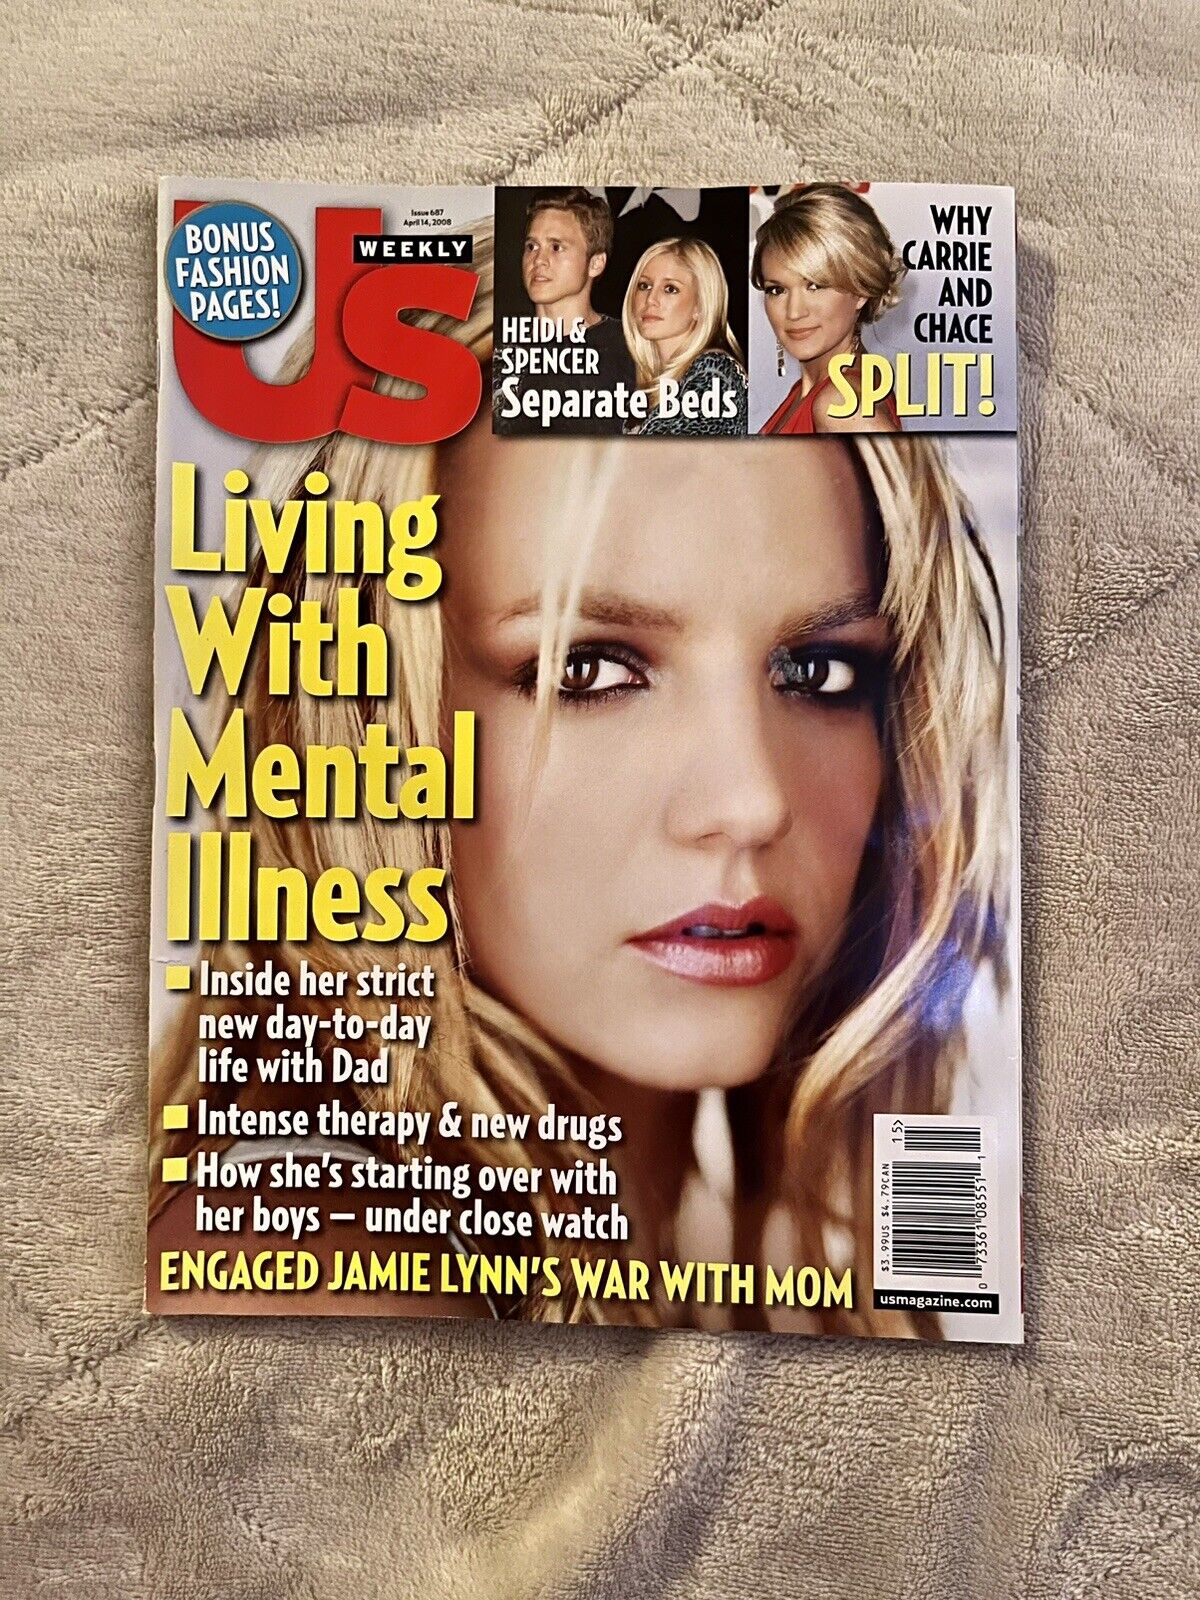 US Weekly April 14, 2008 “Living With Mental Illness” Britney Spears